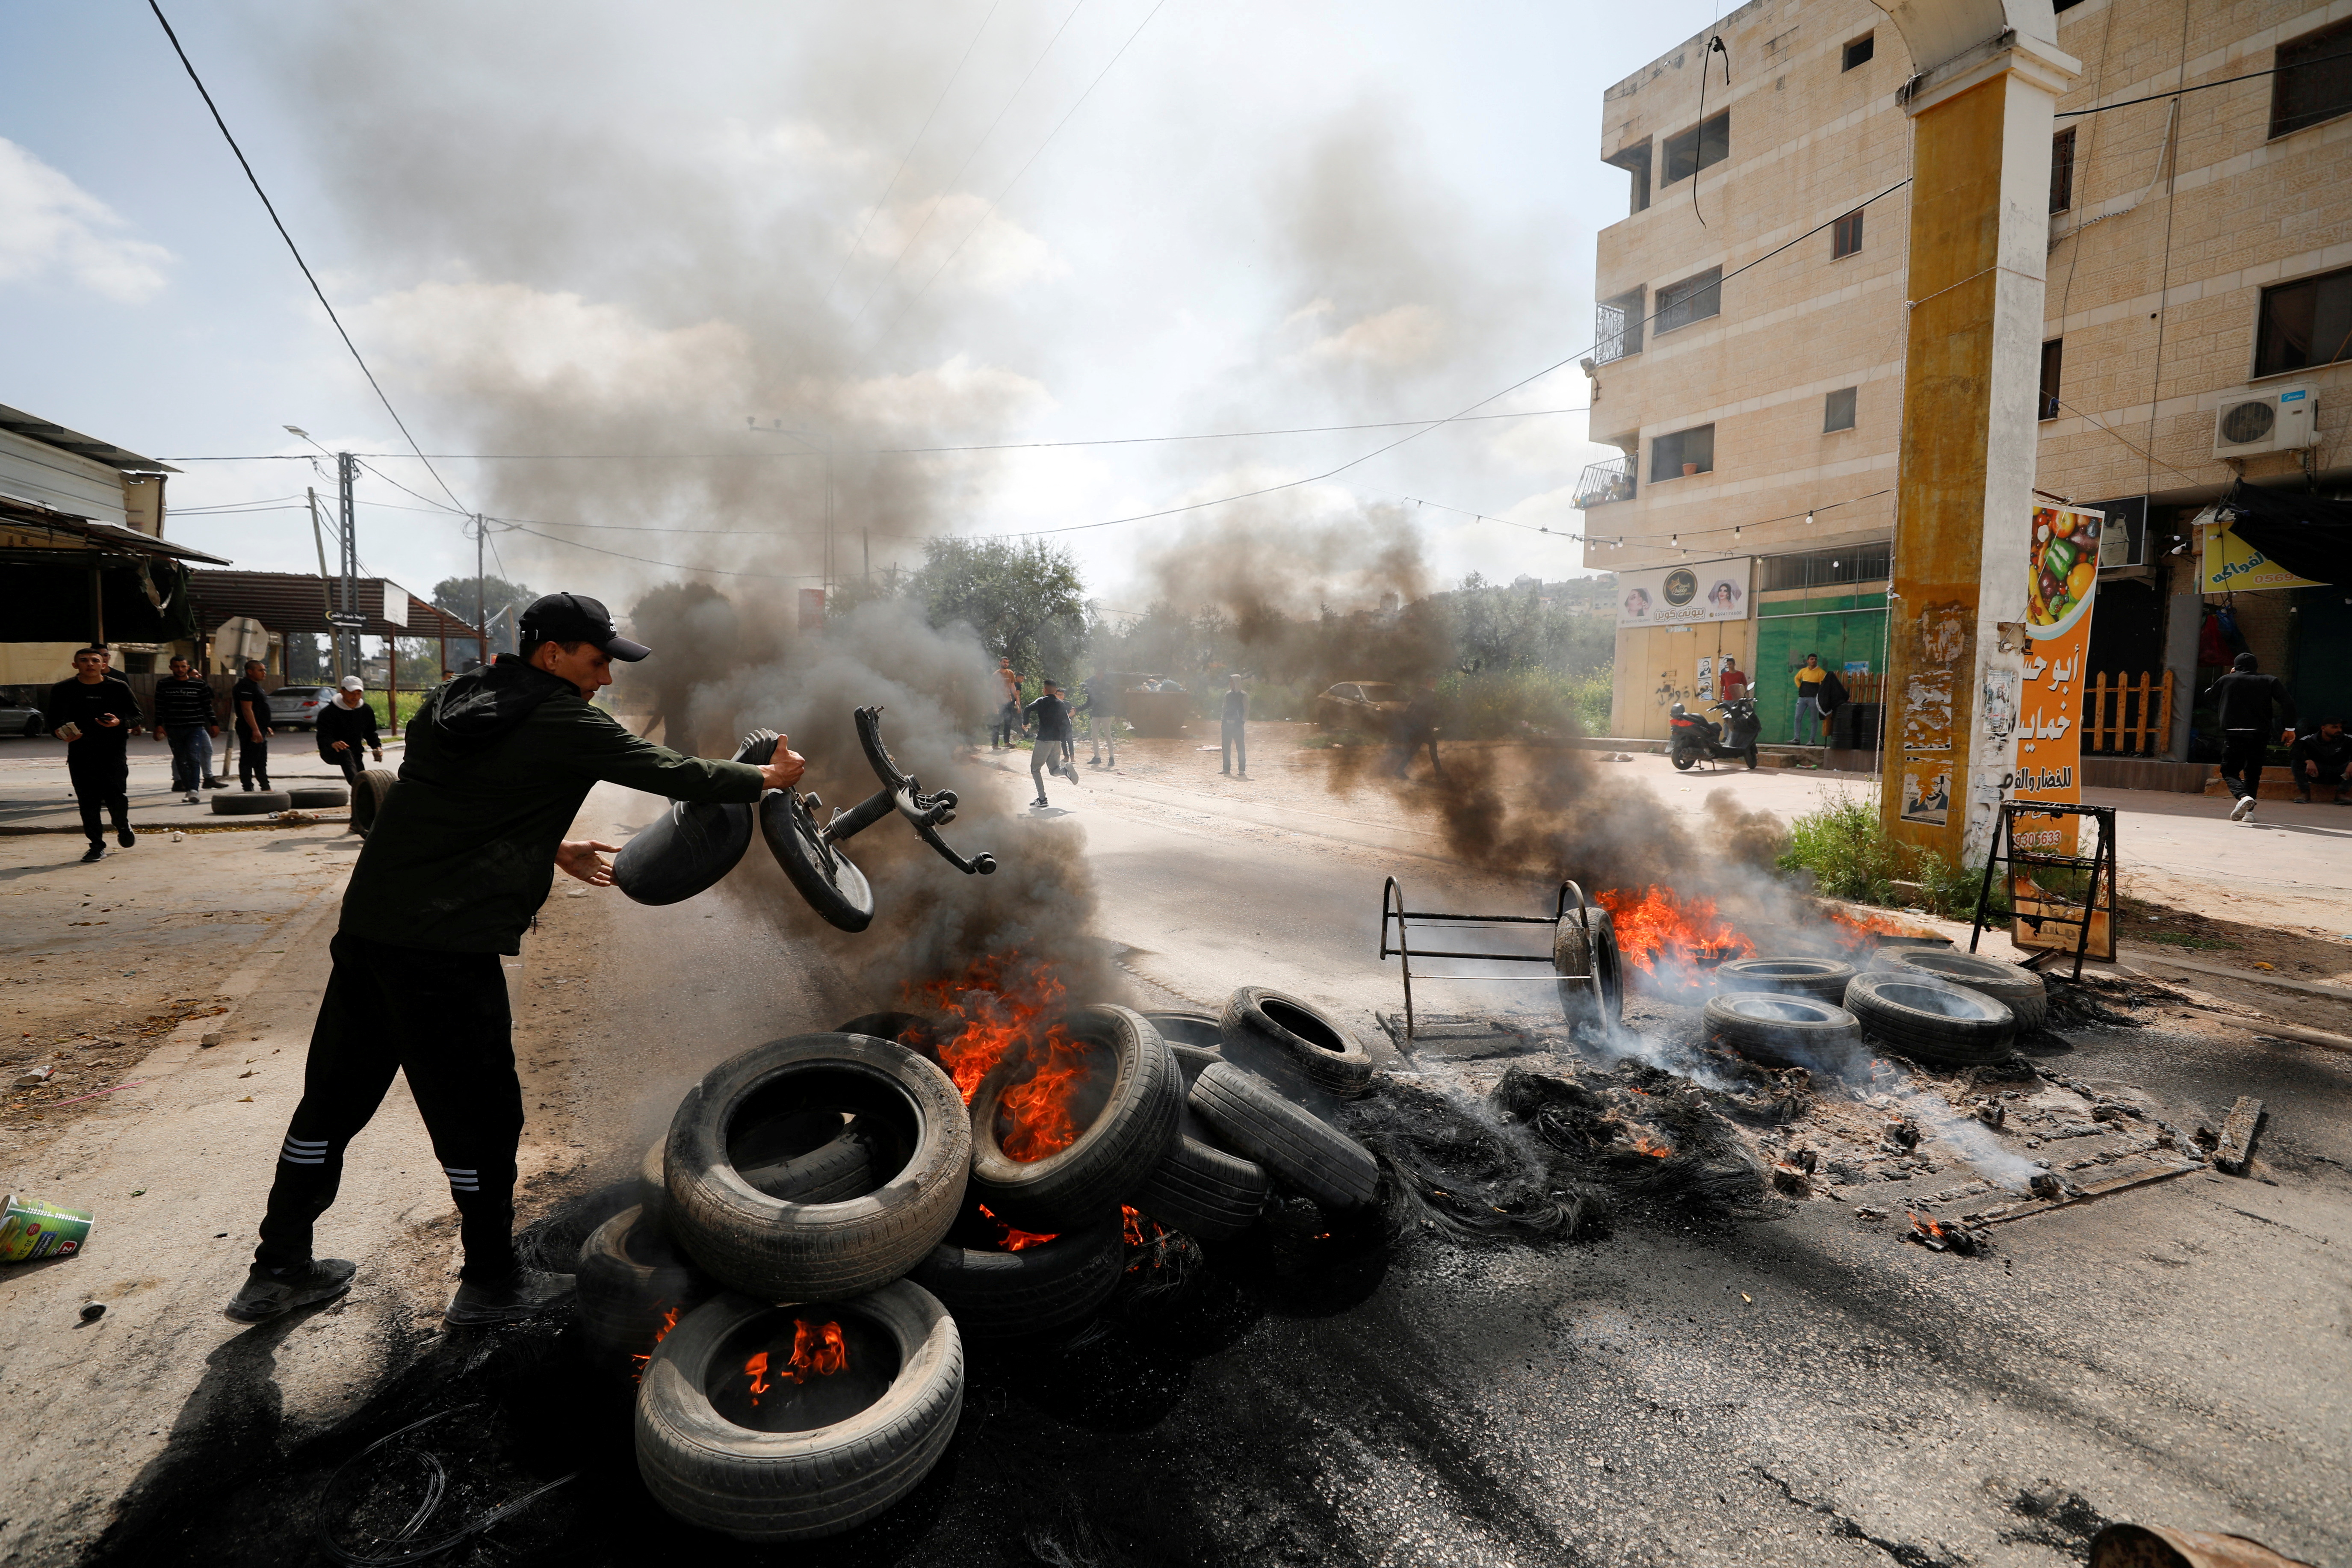 A Palestinian throws a chair at burning tires during clashes with Israeli forces following a raid, in Jenin in the Israeli-occupied West Bank